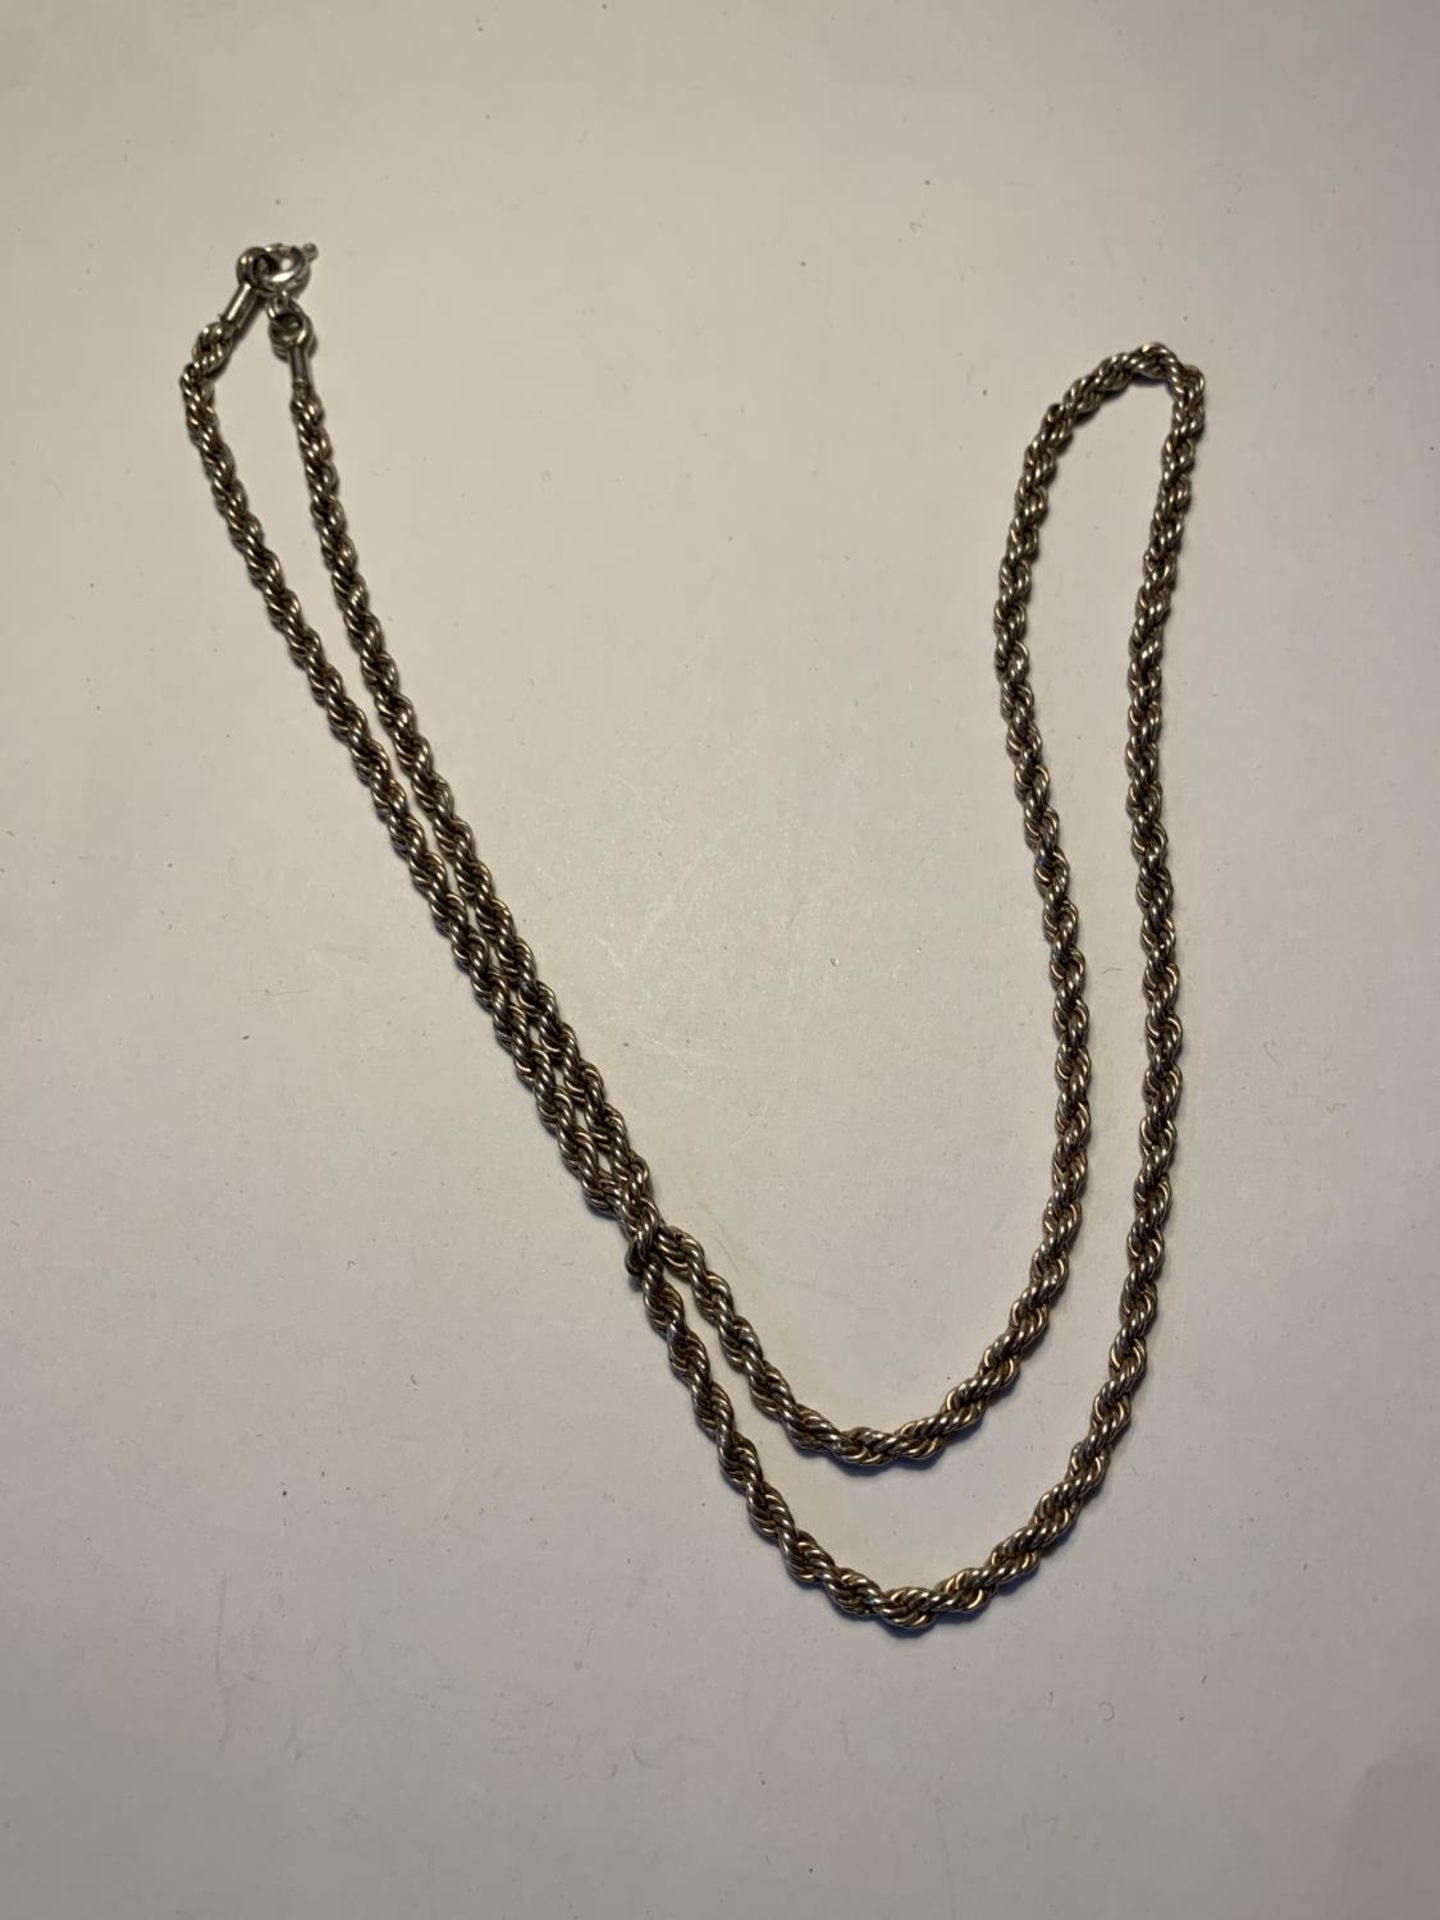 A SILVER ROPE CHAIN NECKLACE LENGTH 24"